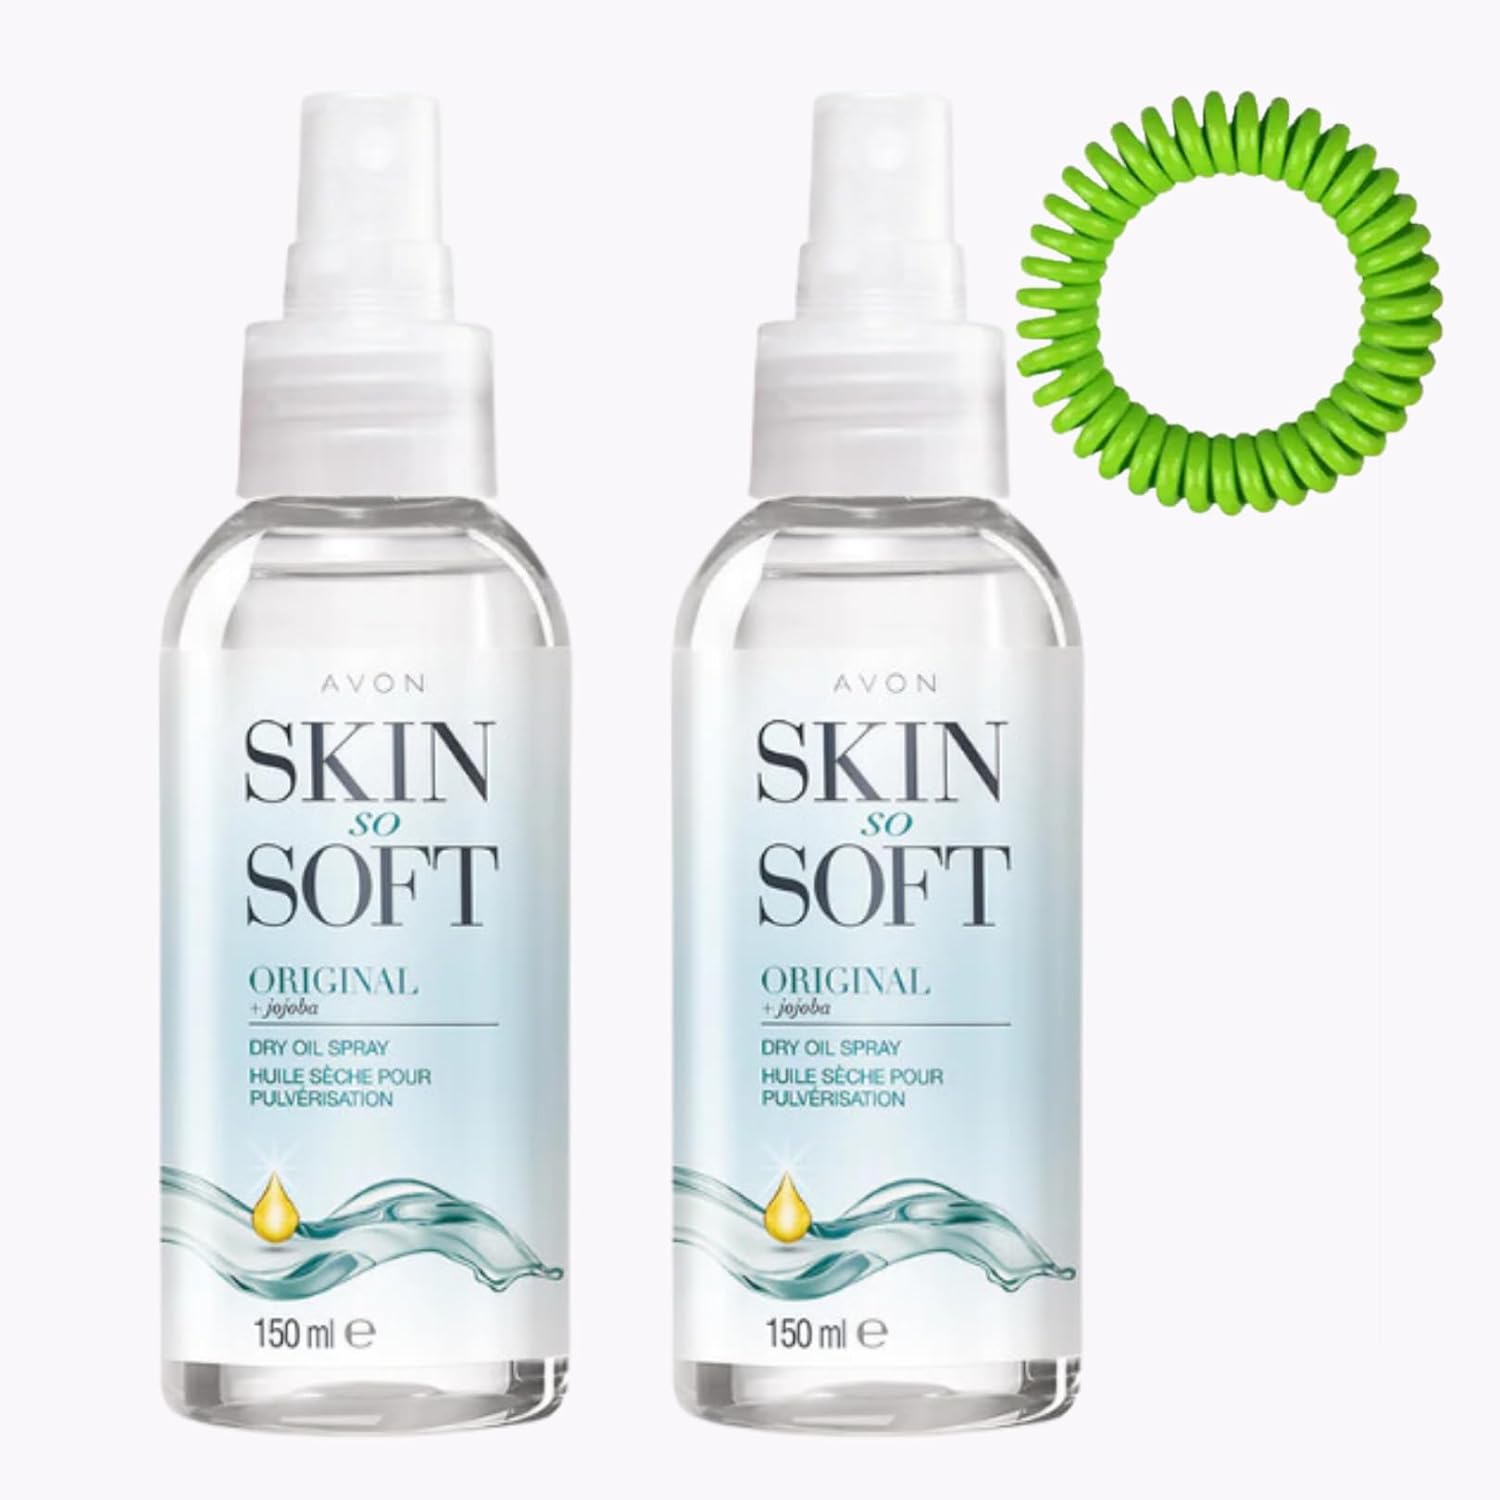 Skin So Soft Dry Oil Body Spray 150ml x 2, Insect & Mosquito Repellent Properties Bundled with Roshearry Mosquito Repellent Bracelet x1 (Random Colour), Waterproof, DEET-Free, Natural Oils.